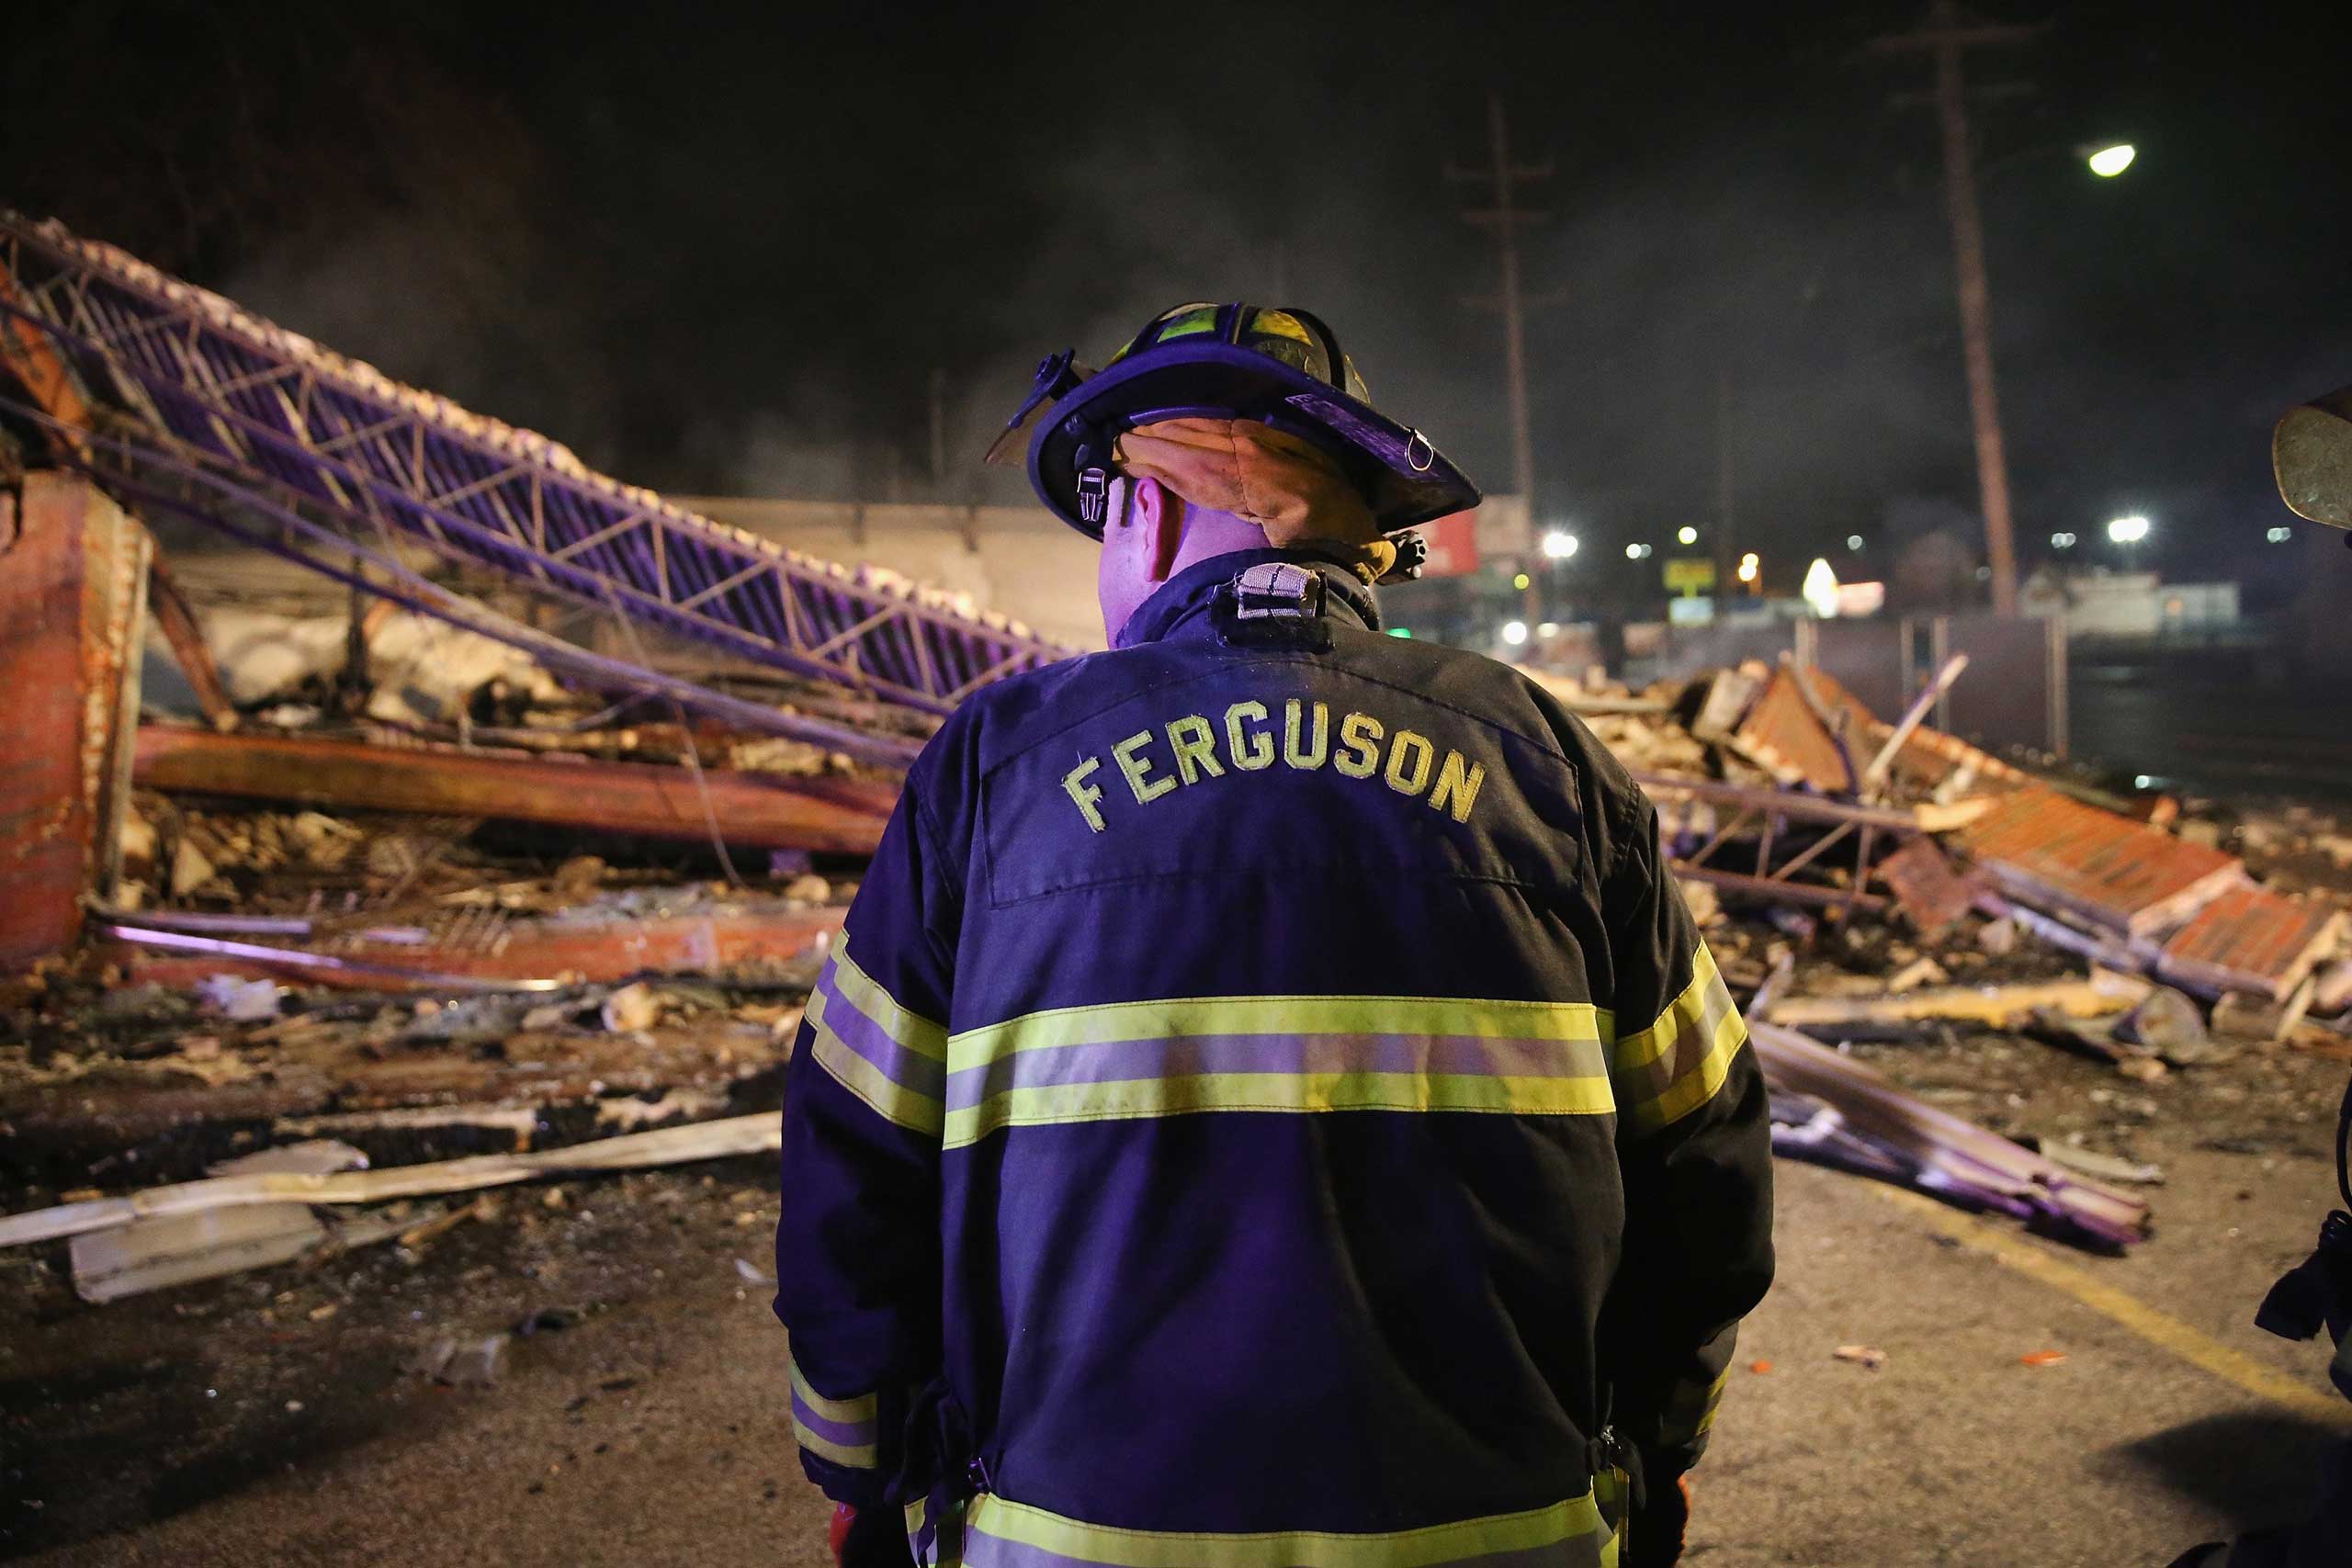 A Ferguson firefighter surveys rubble at a strip mall that was set on fire when rioting erupted following the grand jury announcement in the Michael Brown case on Nov. 25, 2014 in Ferguson, Mo. (Scott Olson—Getty Images)